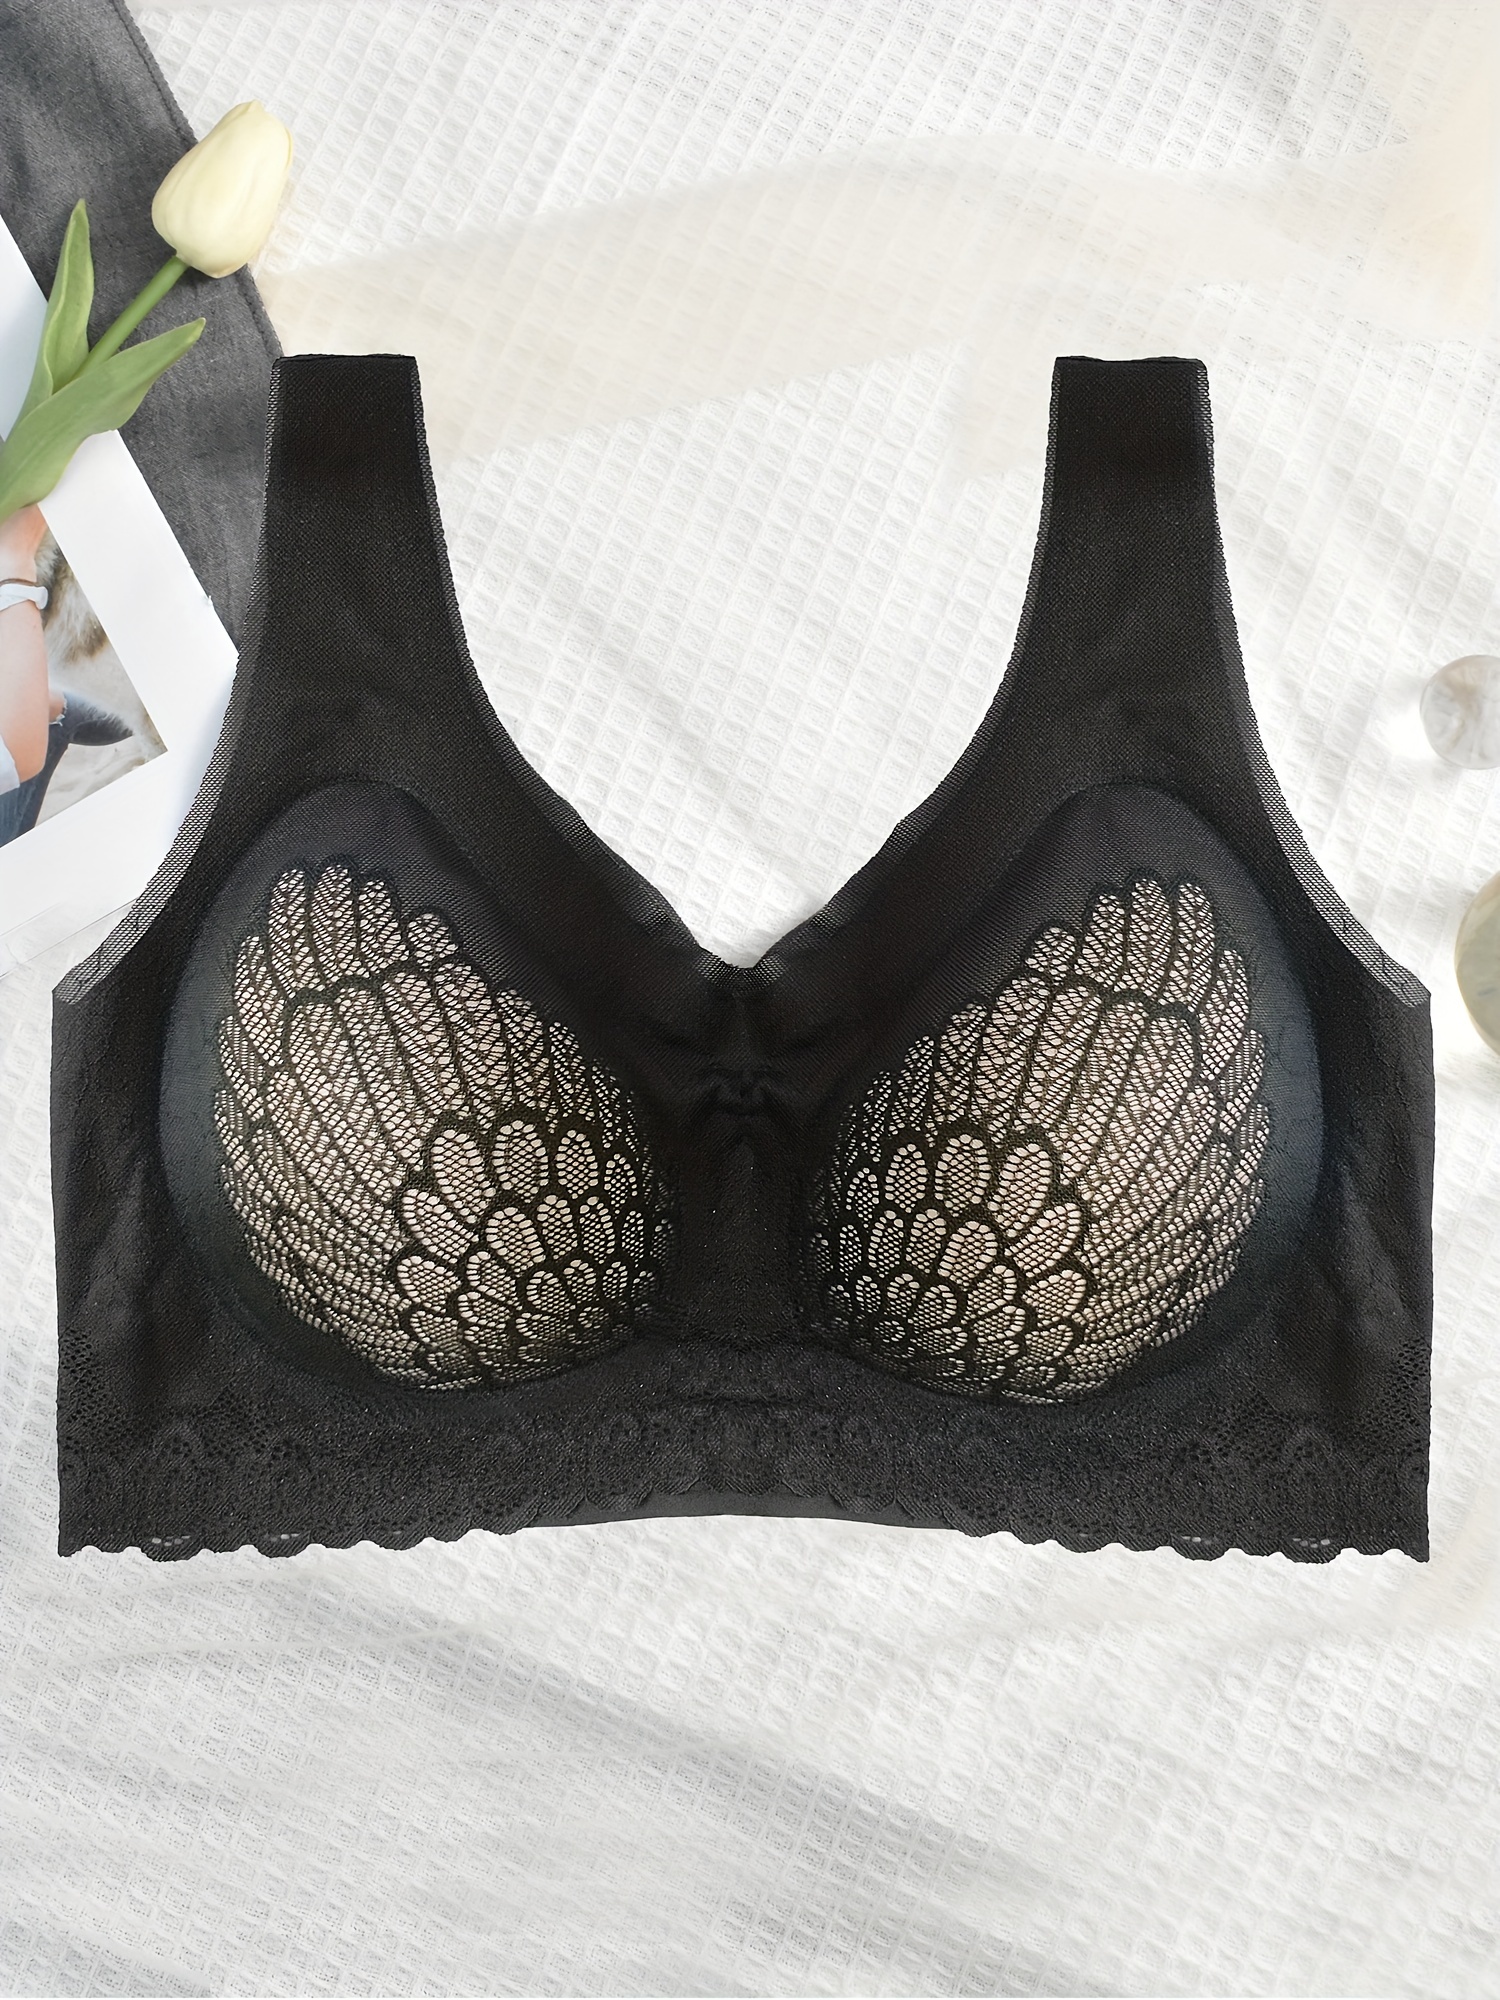 Lace Trim Molded Full Cup Bra